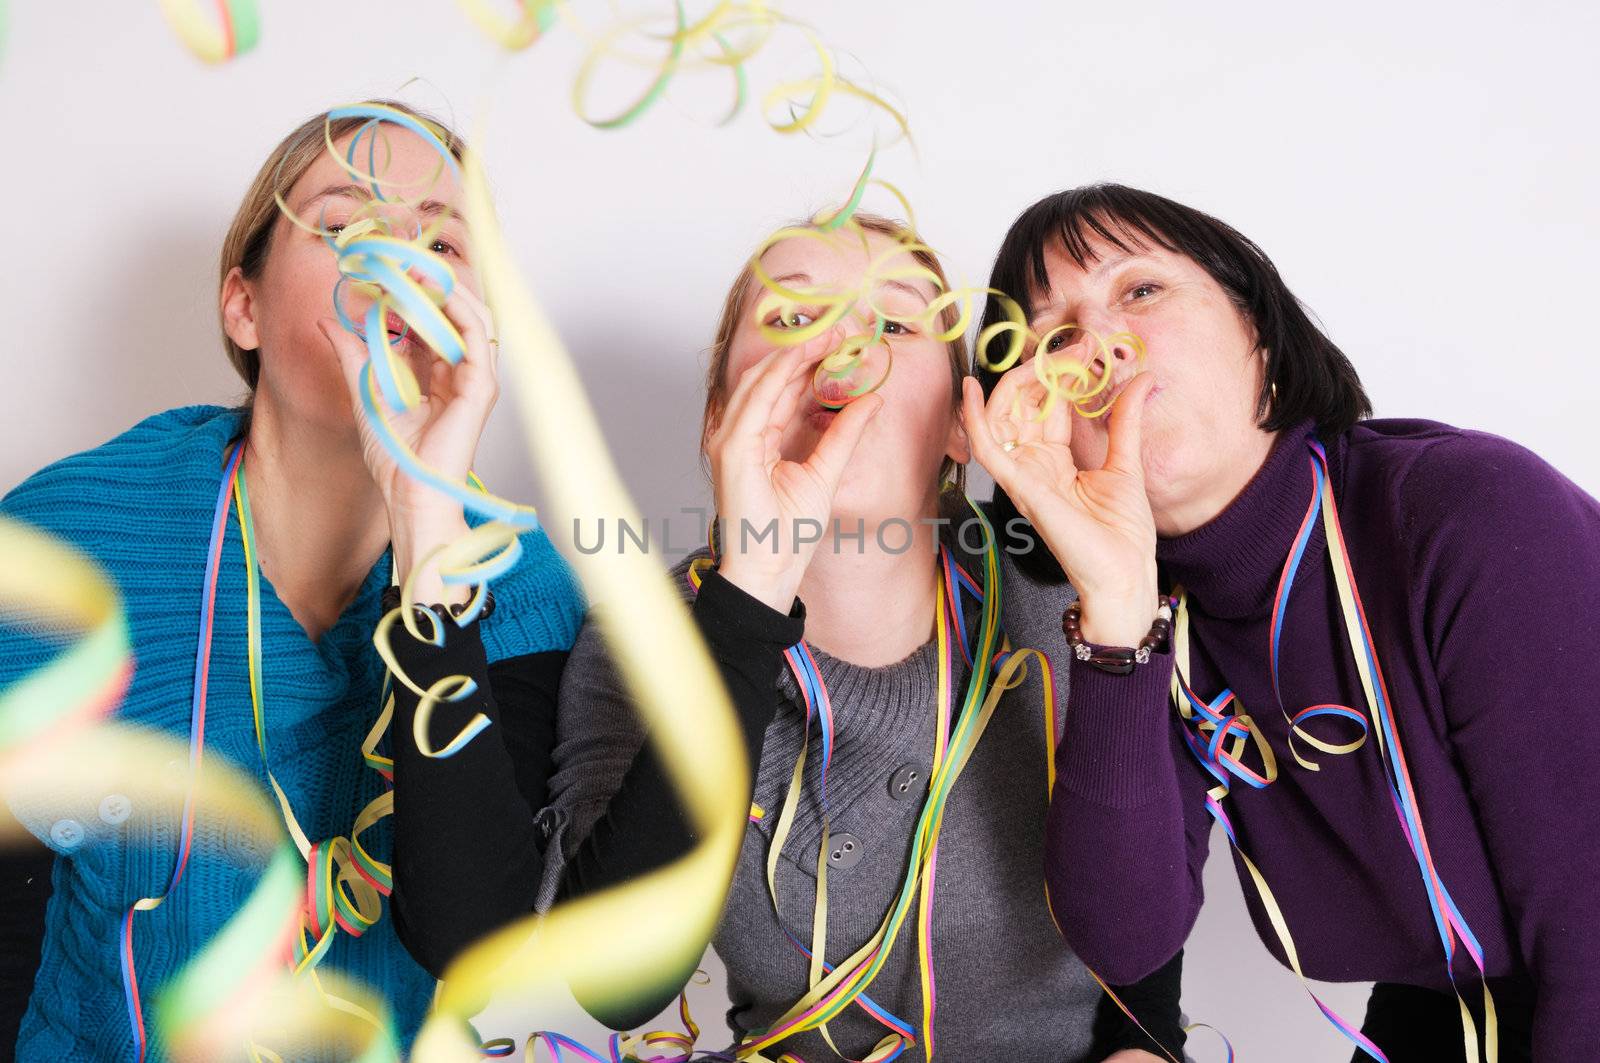 Two young women and one senior woman celebrating New year's eve. Shot taken in front of white background